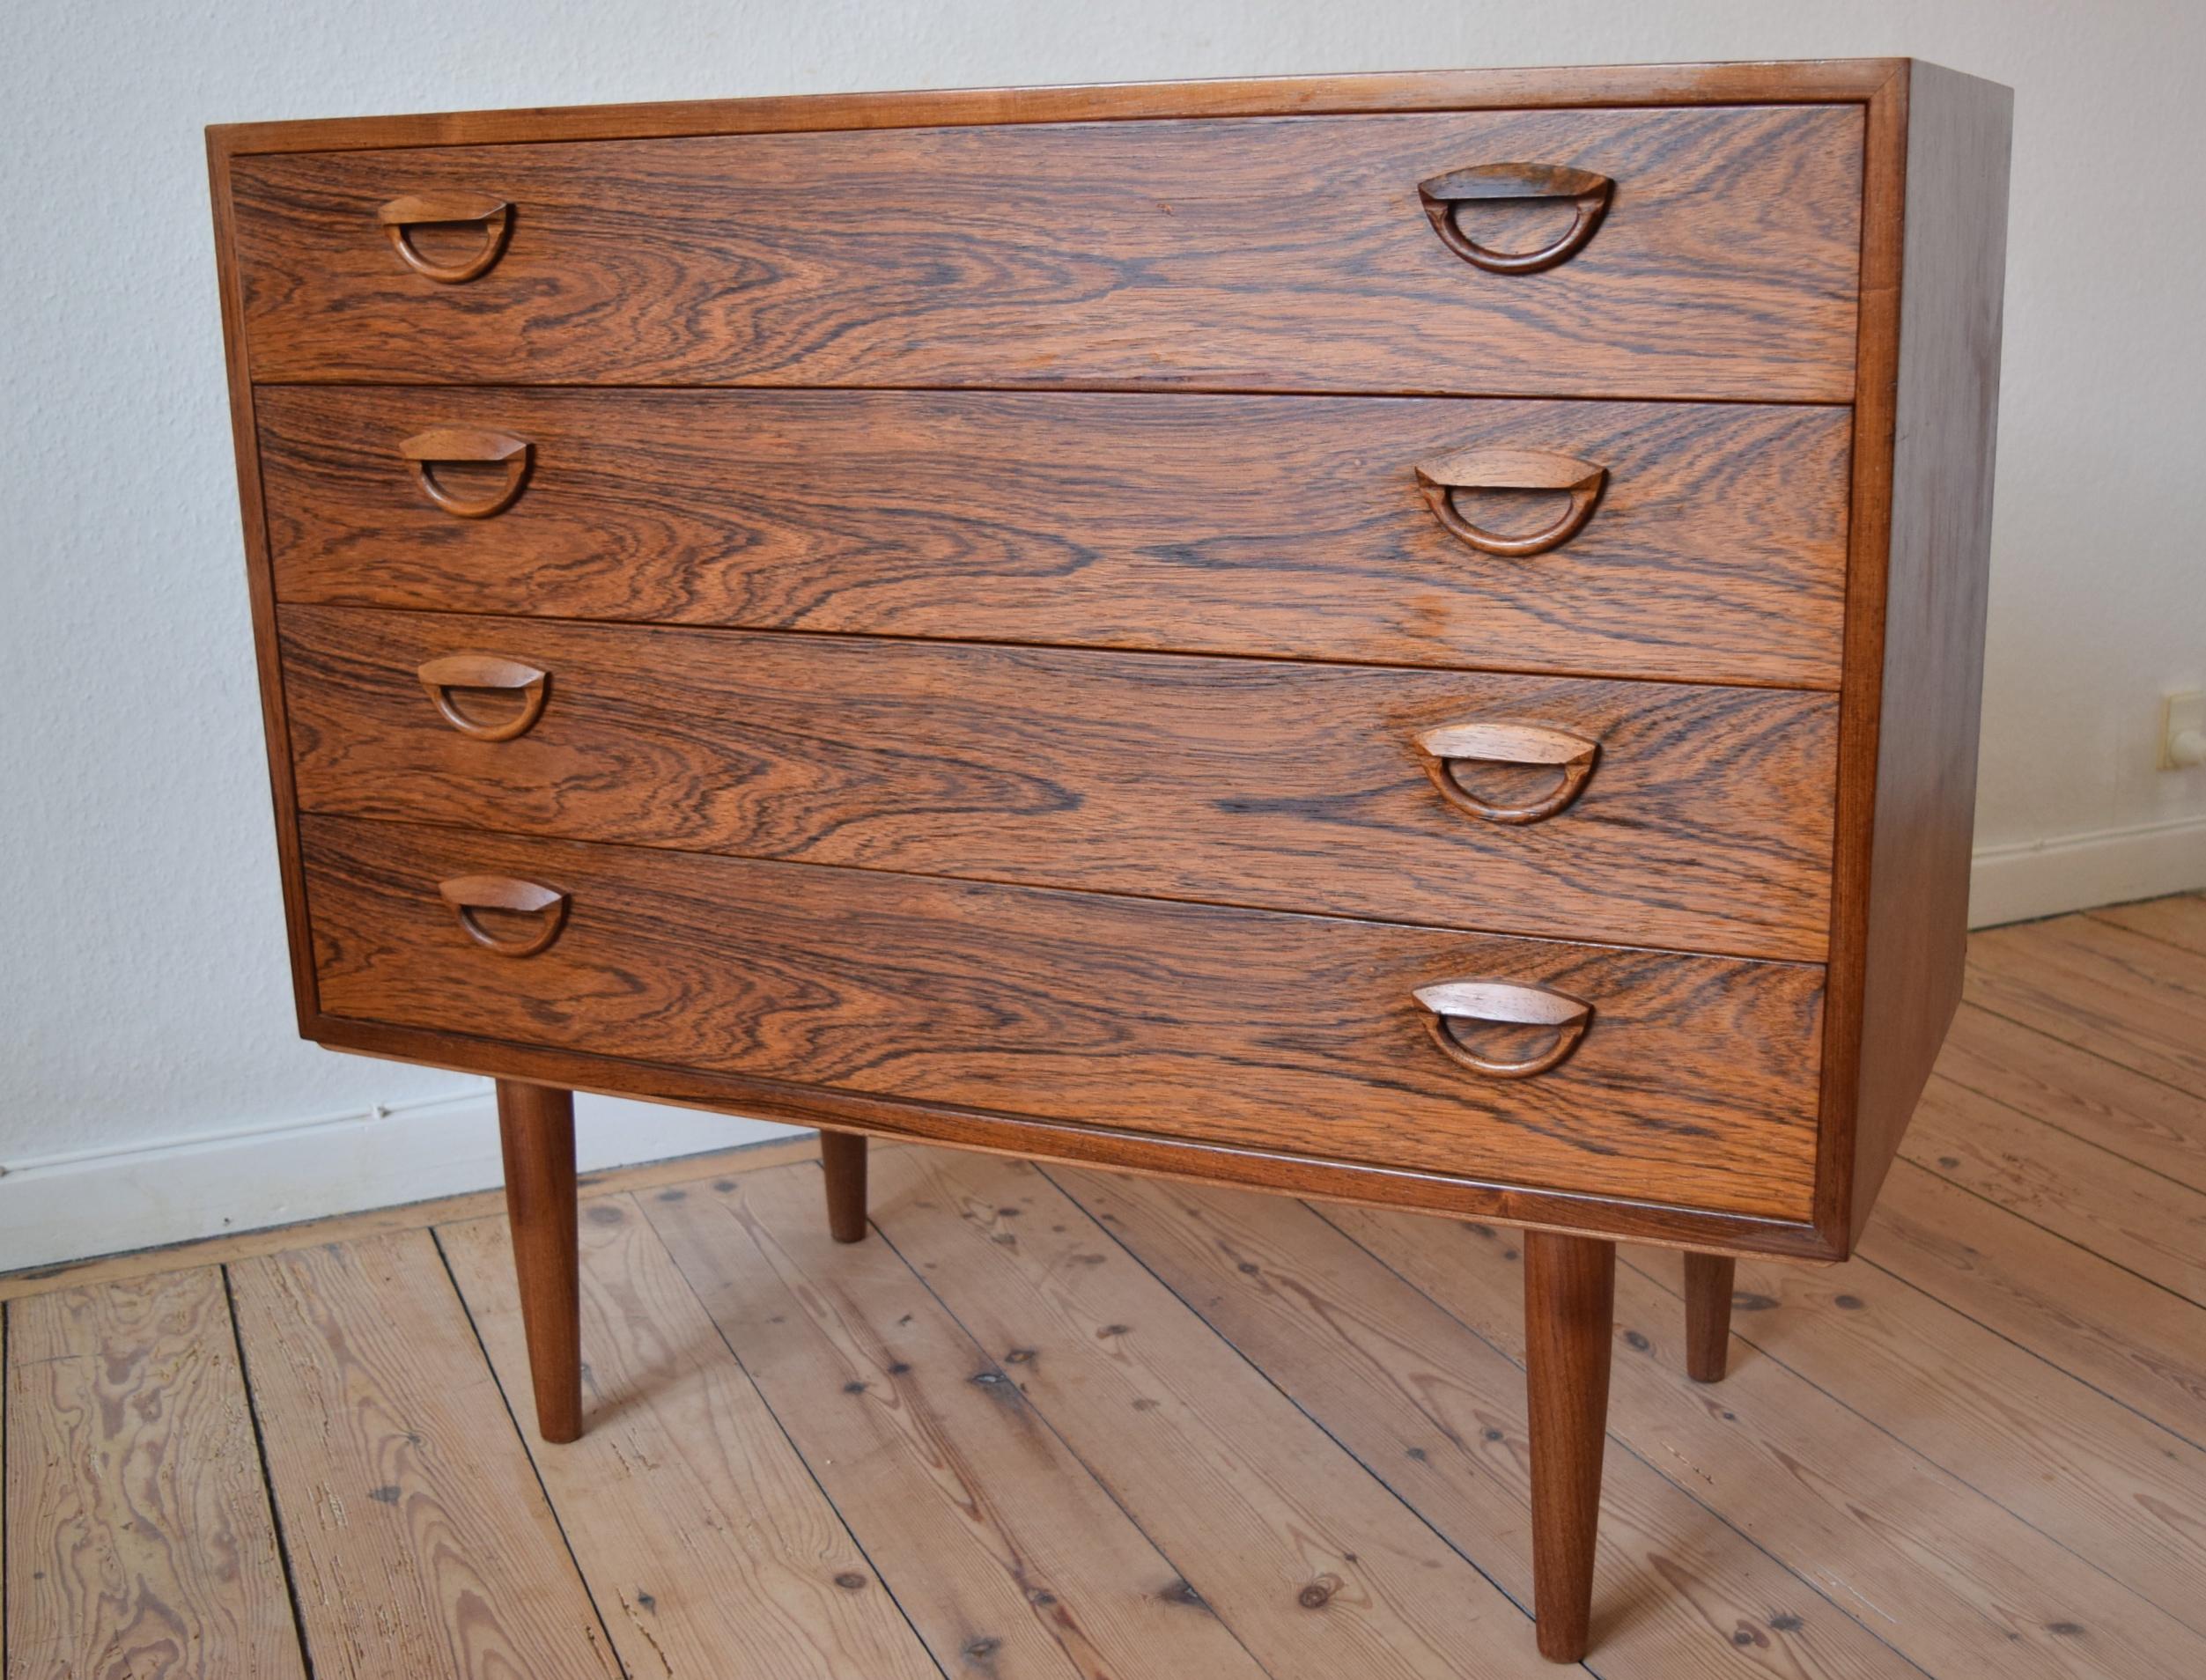 Kai Kristiansen Rosewood Chest of Drawers, 1960s For Sale 3